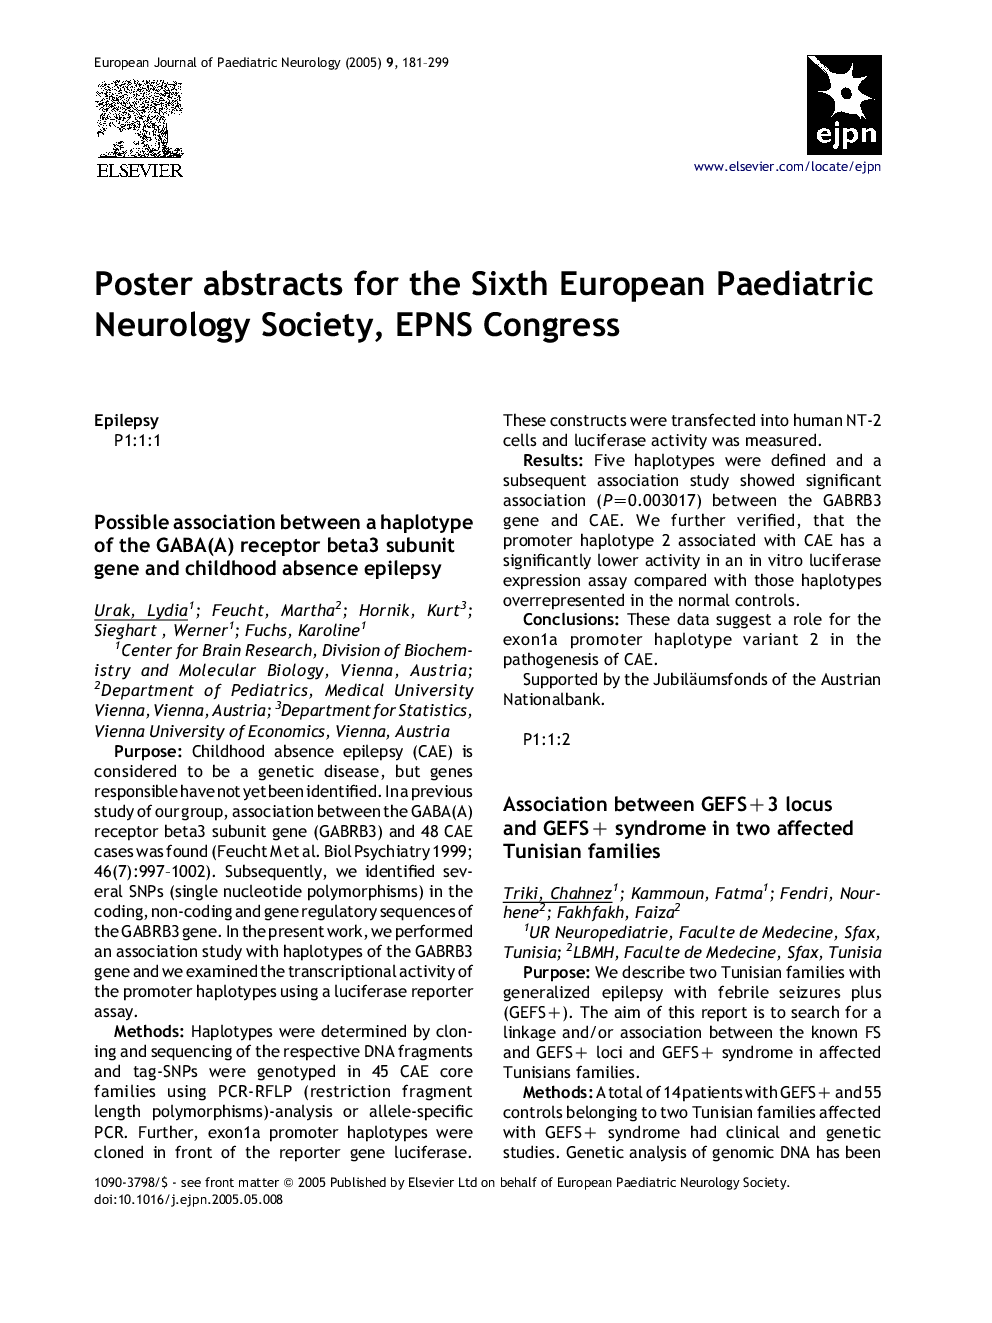 Poster abstracts for the Sixth European Paediatric Neurology Society, EPNS Congress